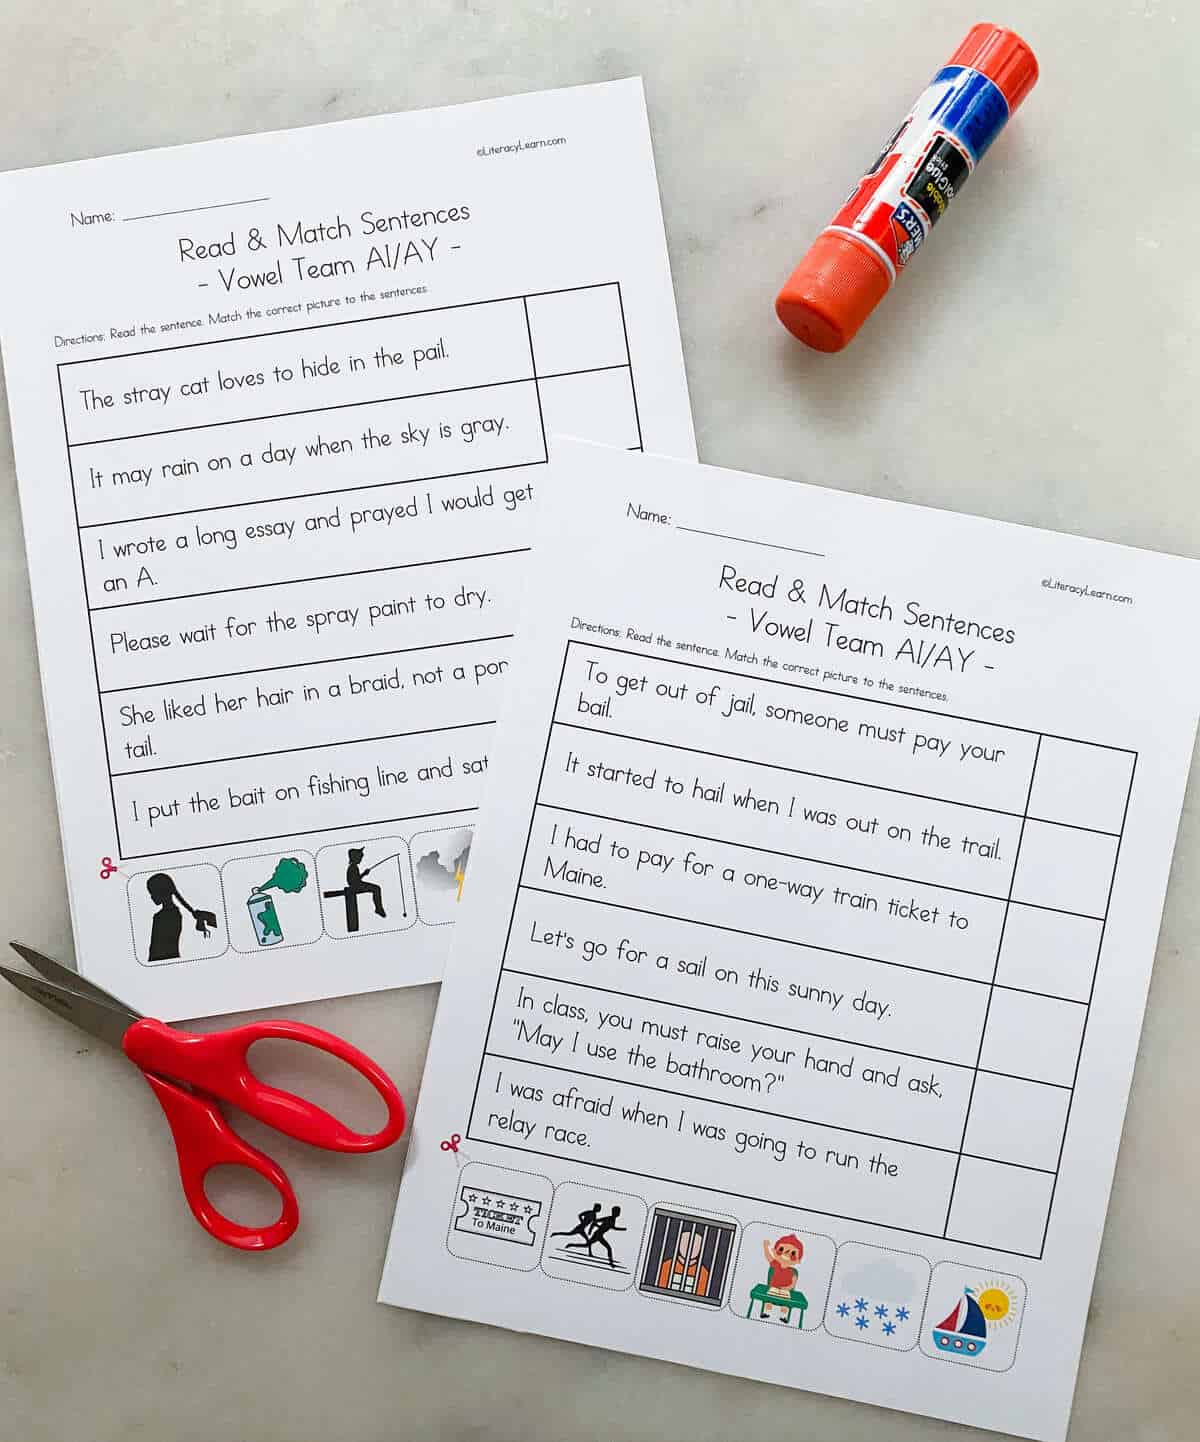 The printed ai/ay worksheets with scissors and a glue stick. 